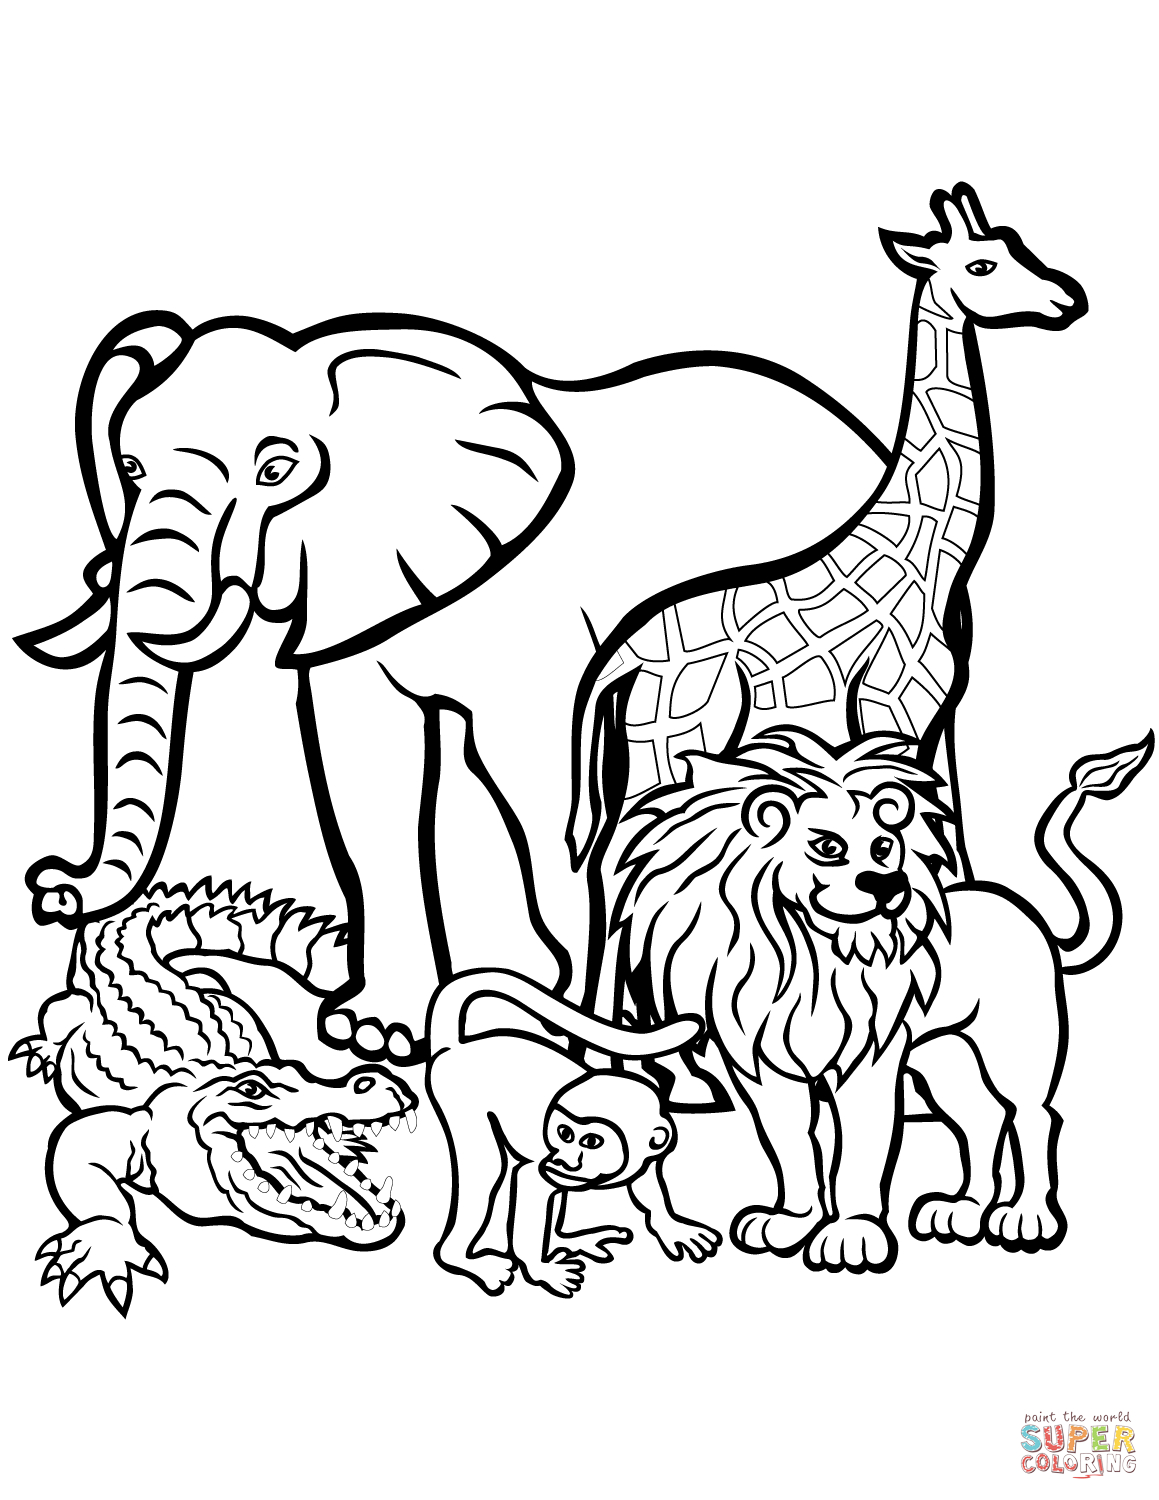 African Animals Coloring Page | Free Printable Coloring Pages - Free Printable Animal Coloring Pages